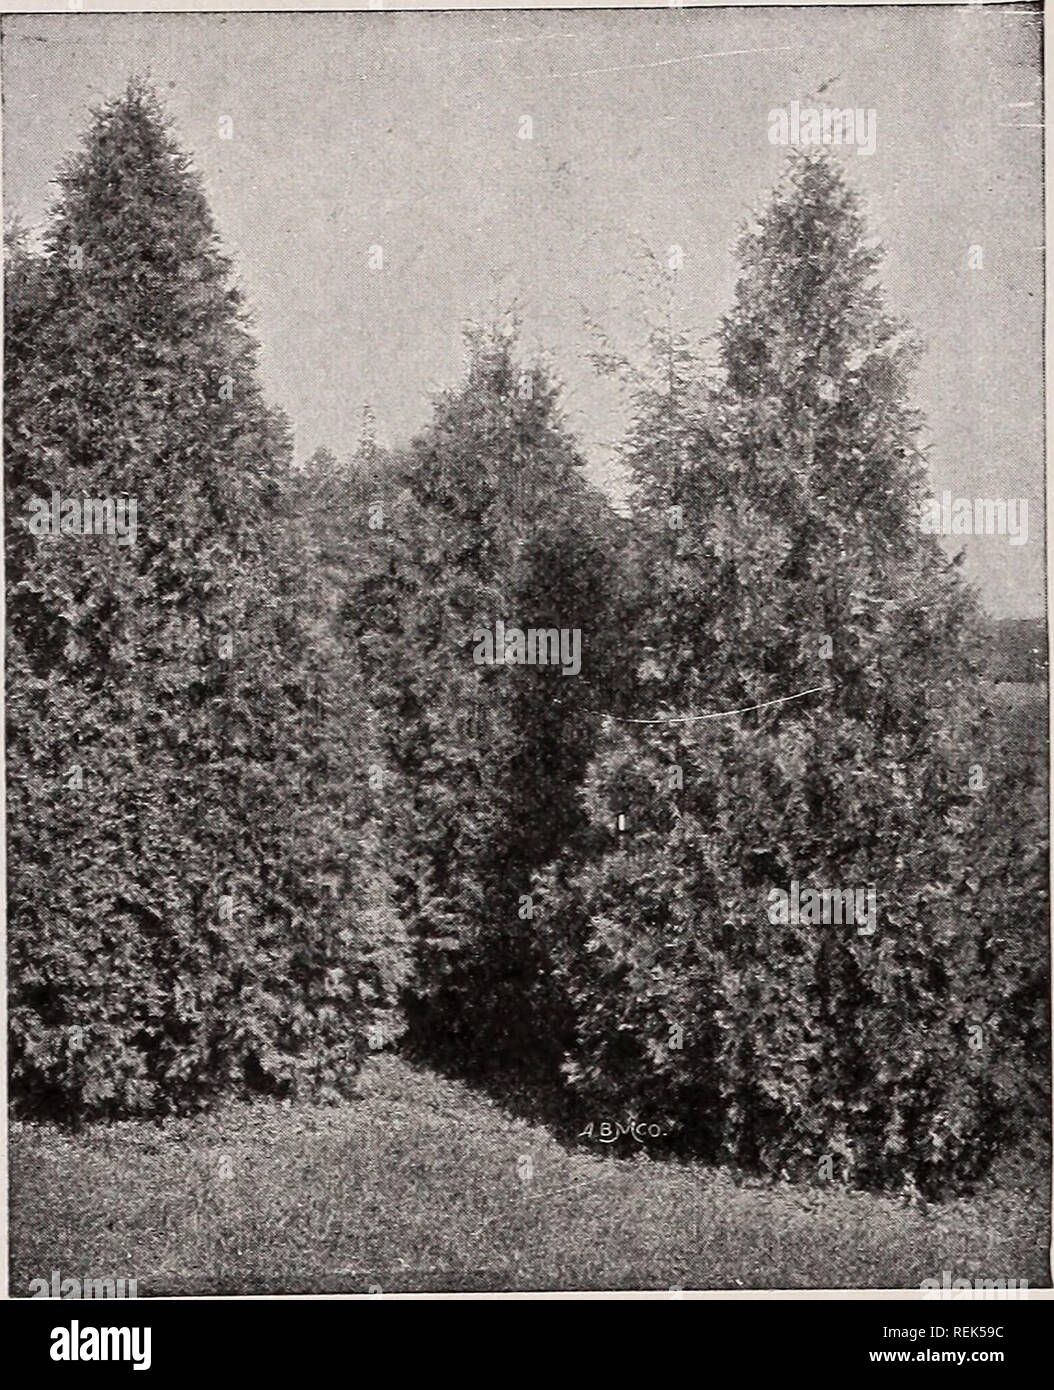 . C. M. Hobbs &amp; Sons. Nurseries Horticulture Catalogs; Evergreens Catalogs; Fruit trees Catalogs; Climbing plants Catalogs; Shrubs Catalogs; Flowers Catalogs; Vegetables Catalogs. 28 C. M. HOBBS &amp; SONS, BRIDGEPORT, INDIANA. Thuya occidentalis—American Arbor-Vitae. Taxus - The Yews cuspidata (Japanese Yew). Distinctly Japa- nese in effect; of free growing, open habit; green needles; a tree of highest merit, and of great hardiness, standing our climate in almost any soil or situation. var. repandans (Spreading English Yew). One of the most attractive low evergreens. Very slow-growing; ri Stock Photo